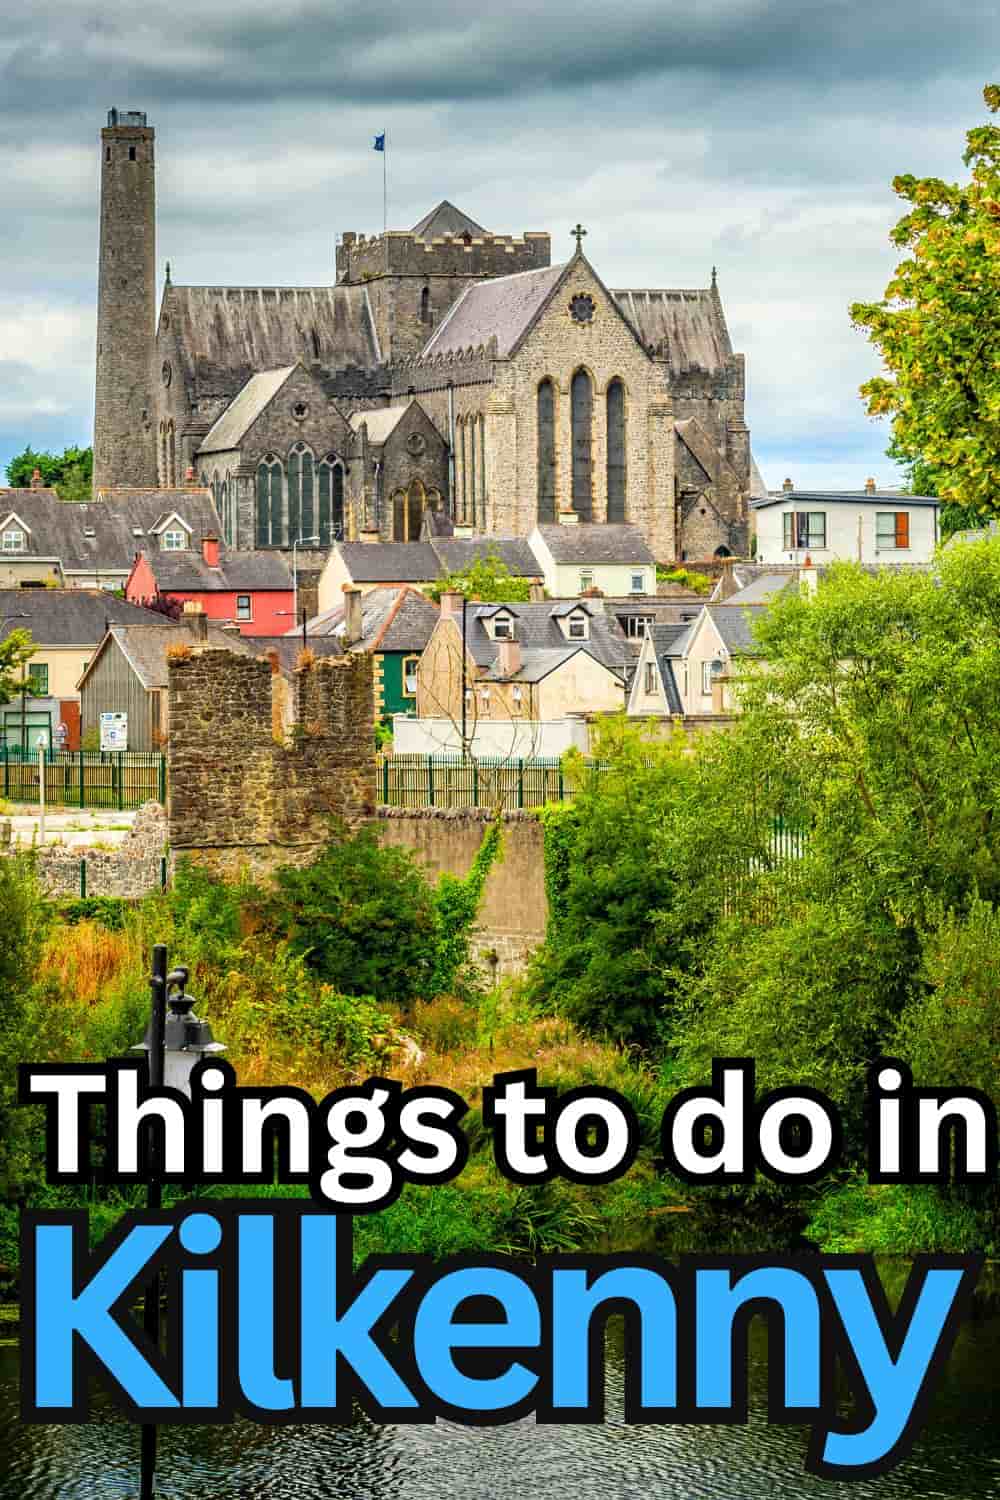 15 Things to Do in Kilkenny